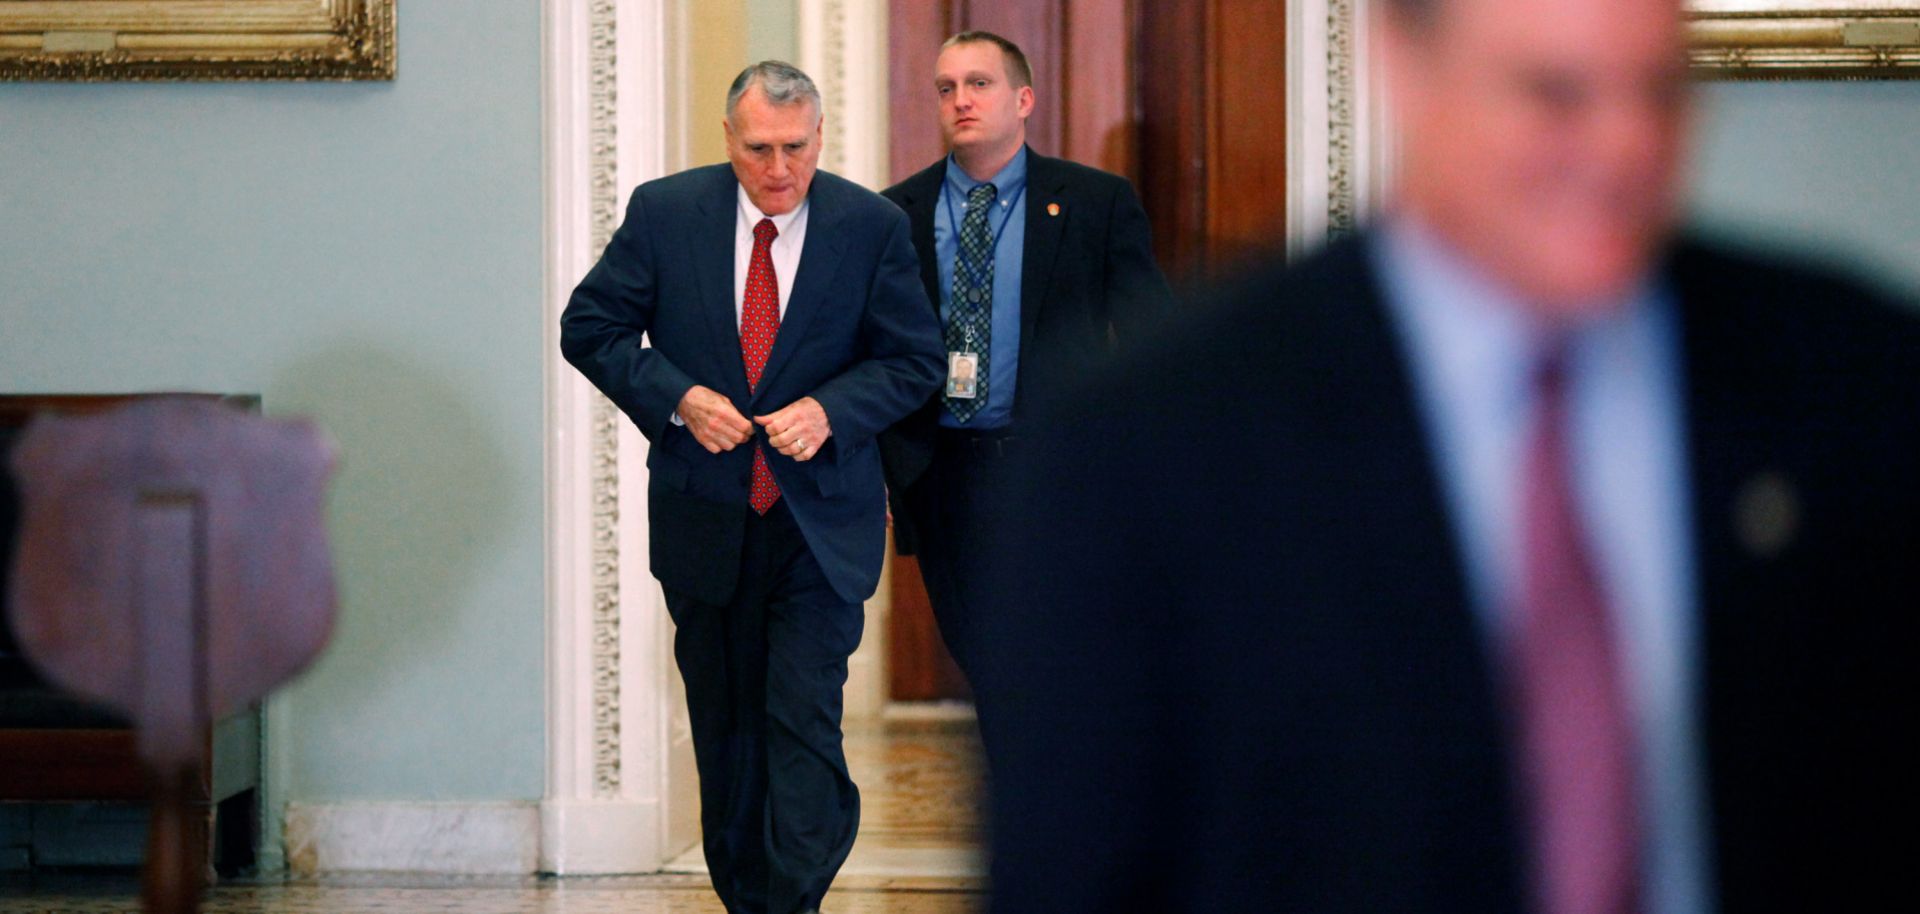 Then-Minority Whip Jon Kyl of Arizona, left, heads for a closed session of the Senate on Dec. 20, 2010, to discuss the strategic arms treaty known as New START.